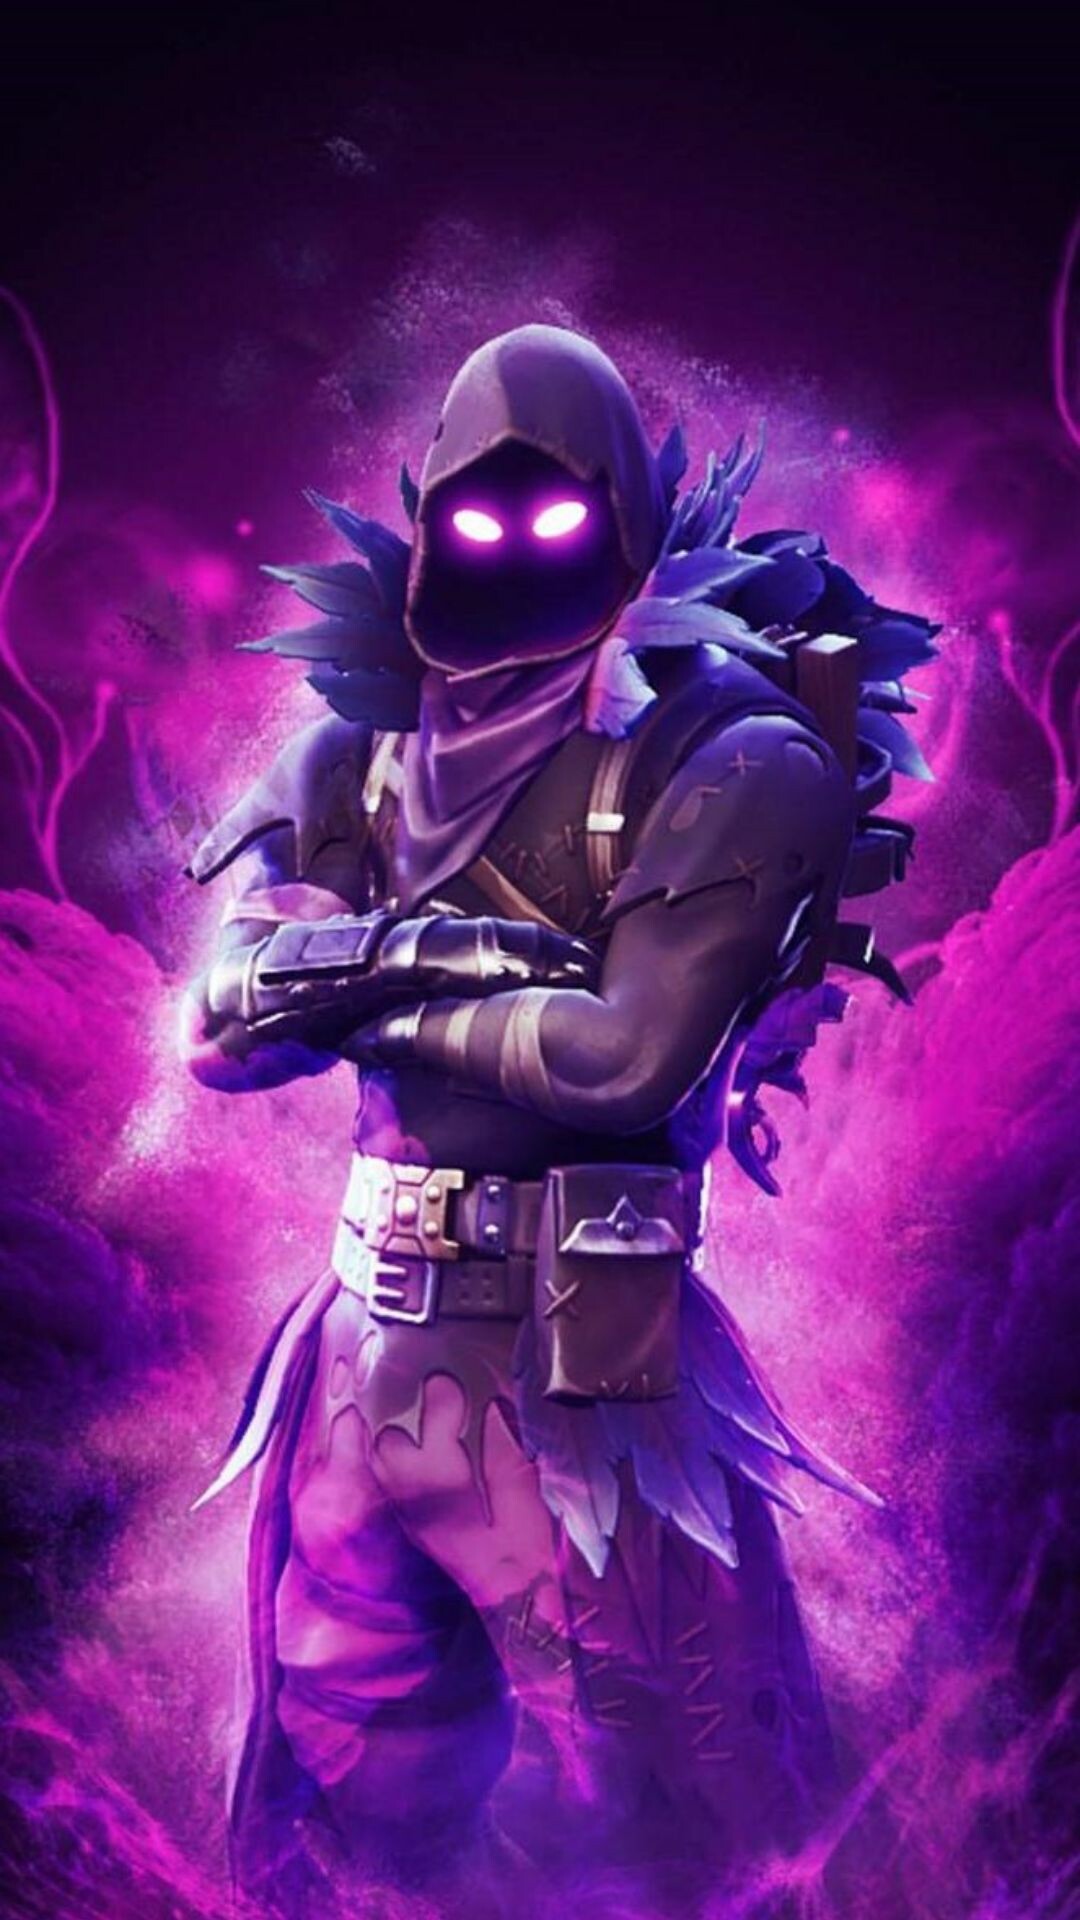 Fortnite: A third-person shooter game where up to 100 players compete to be the last person or team standing. 1080x1920 Full HD Background.